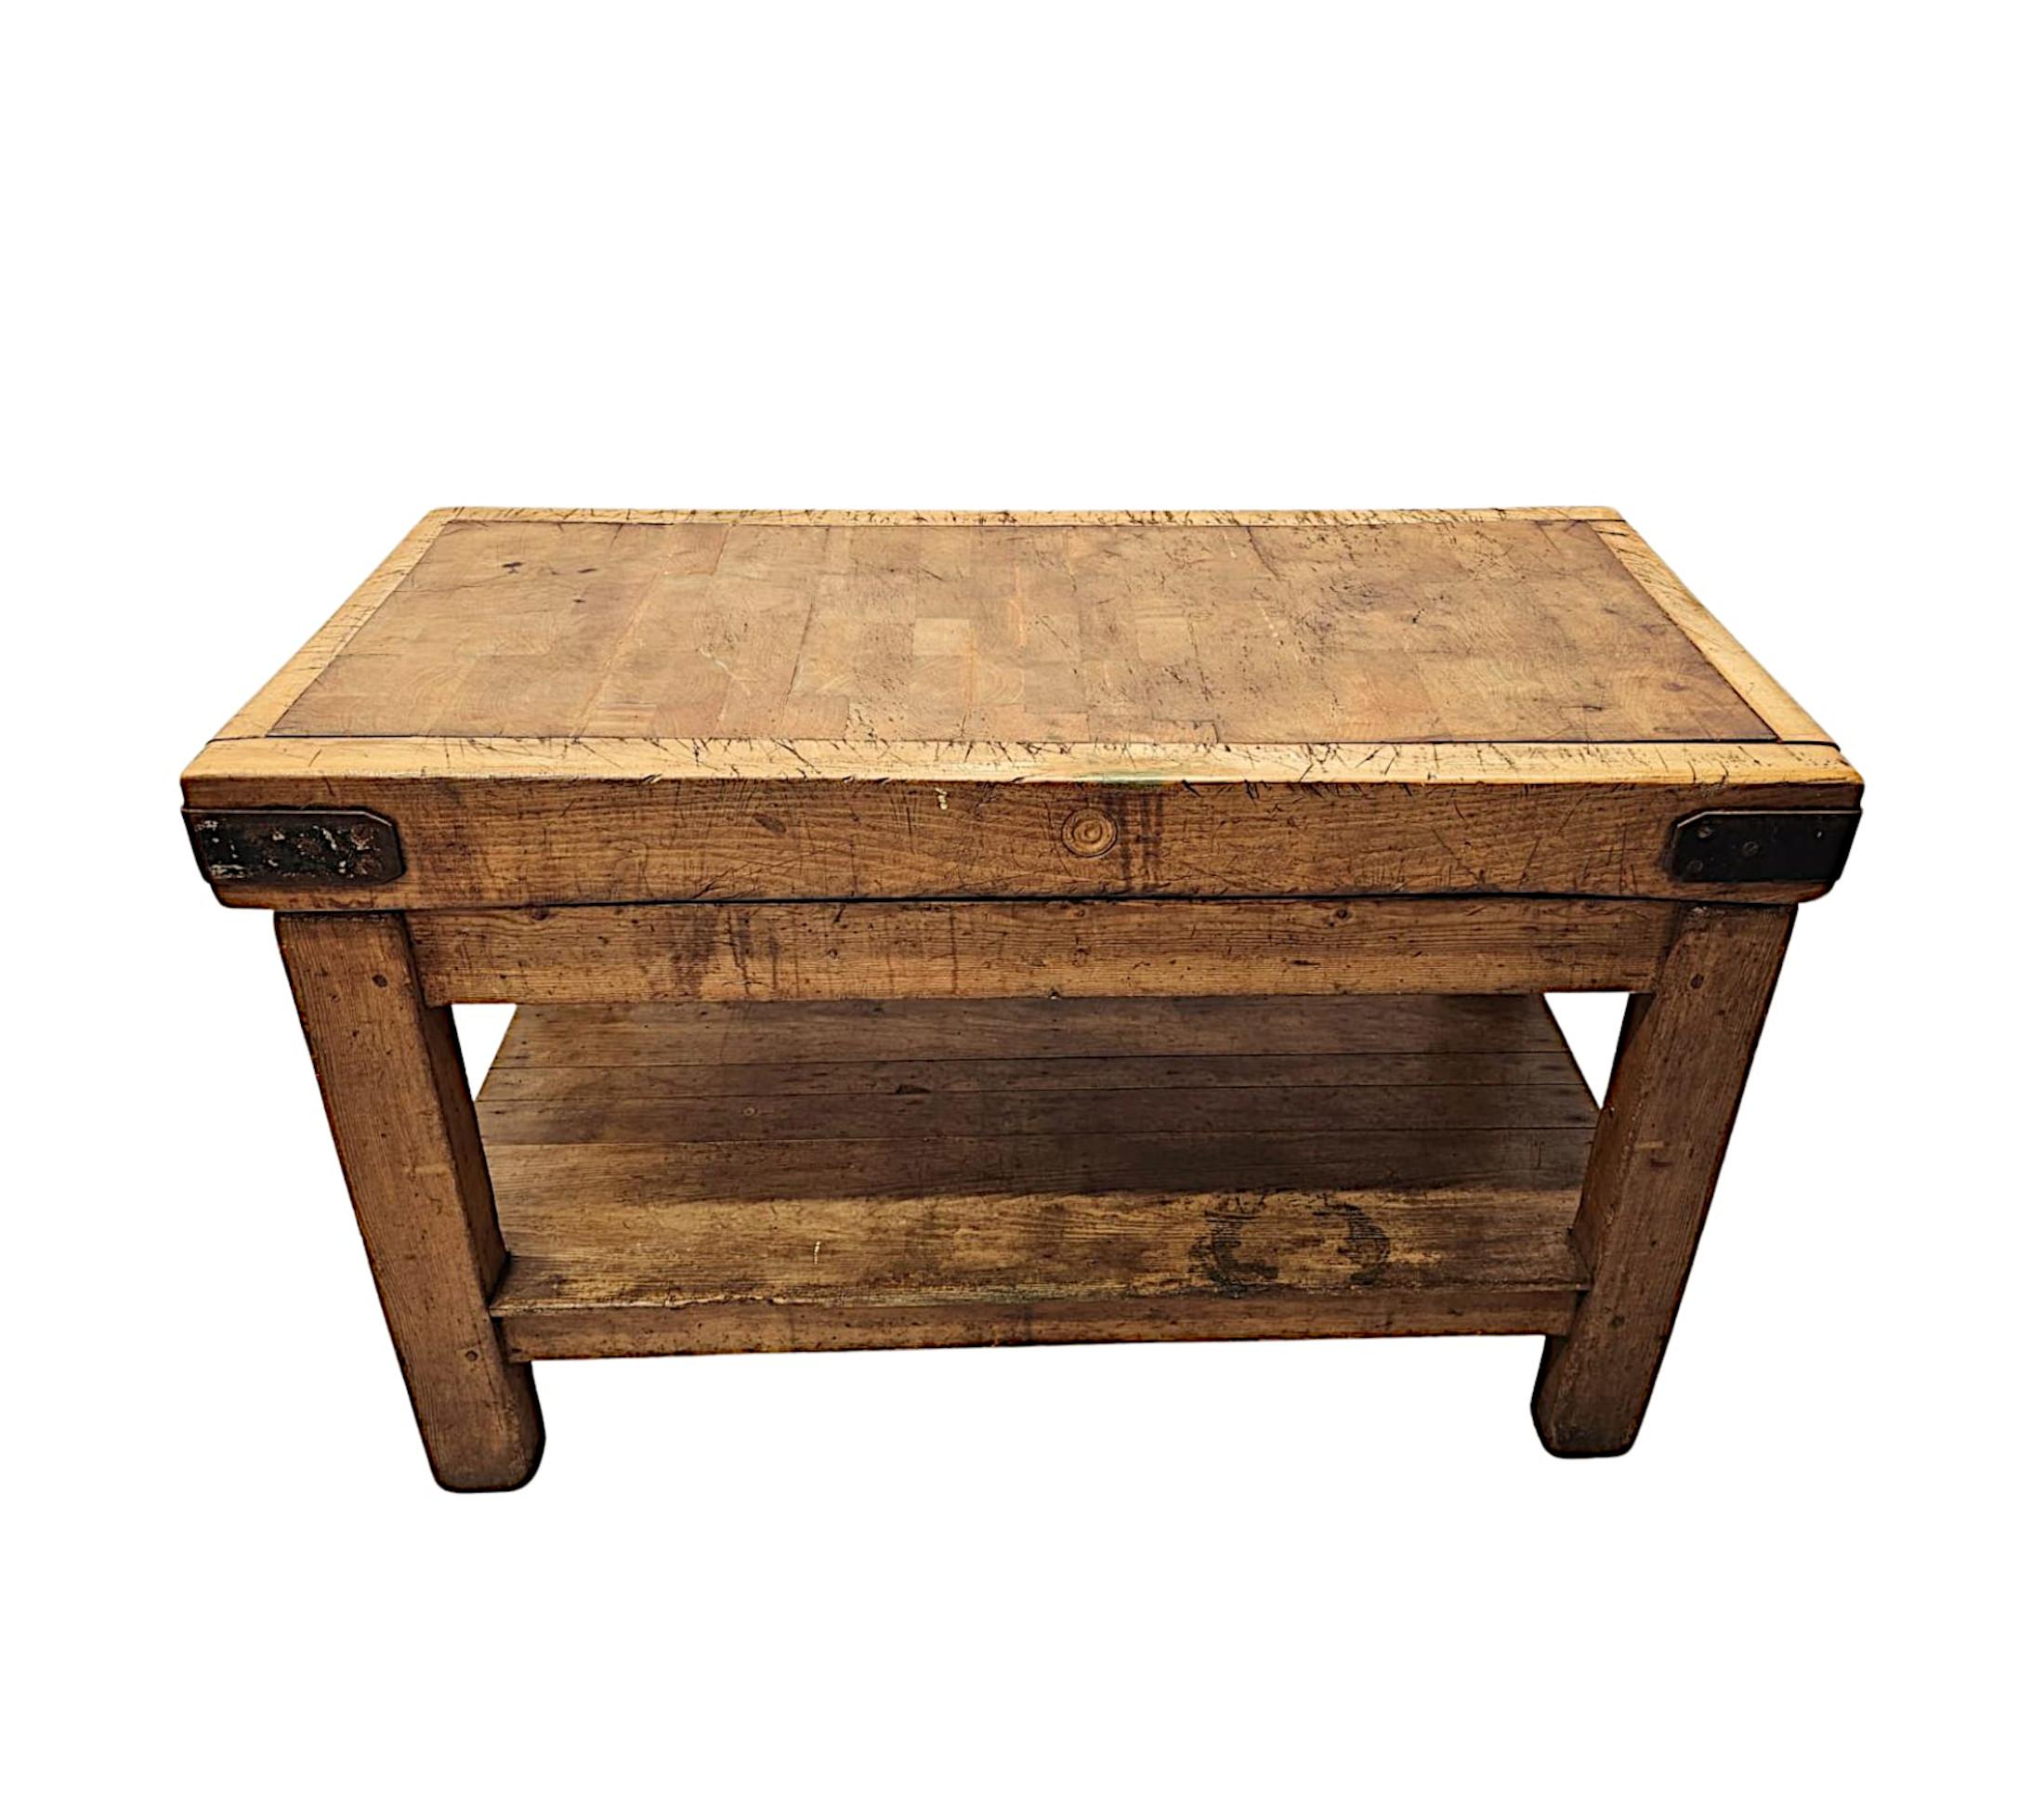 A very rare and impressive 19th Century pine two tiered butchers block table of exceptional quality, large proportions and finely hand carved with rich patination and grain.  The finely figured moulded, panelled and iron bound top of rectangular